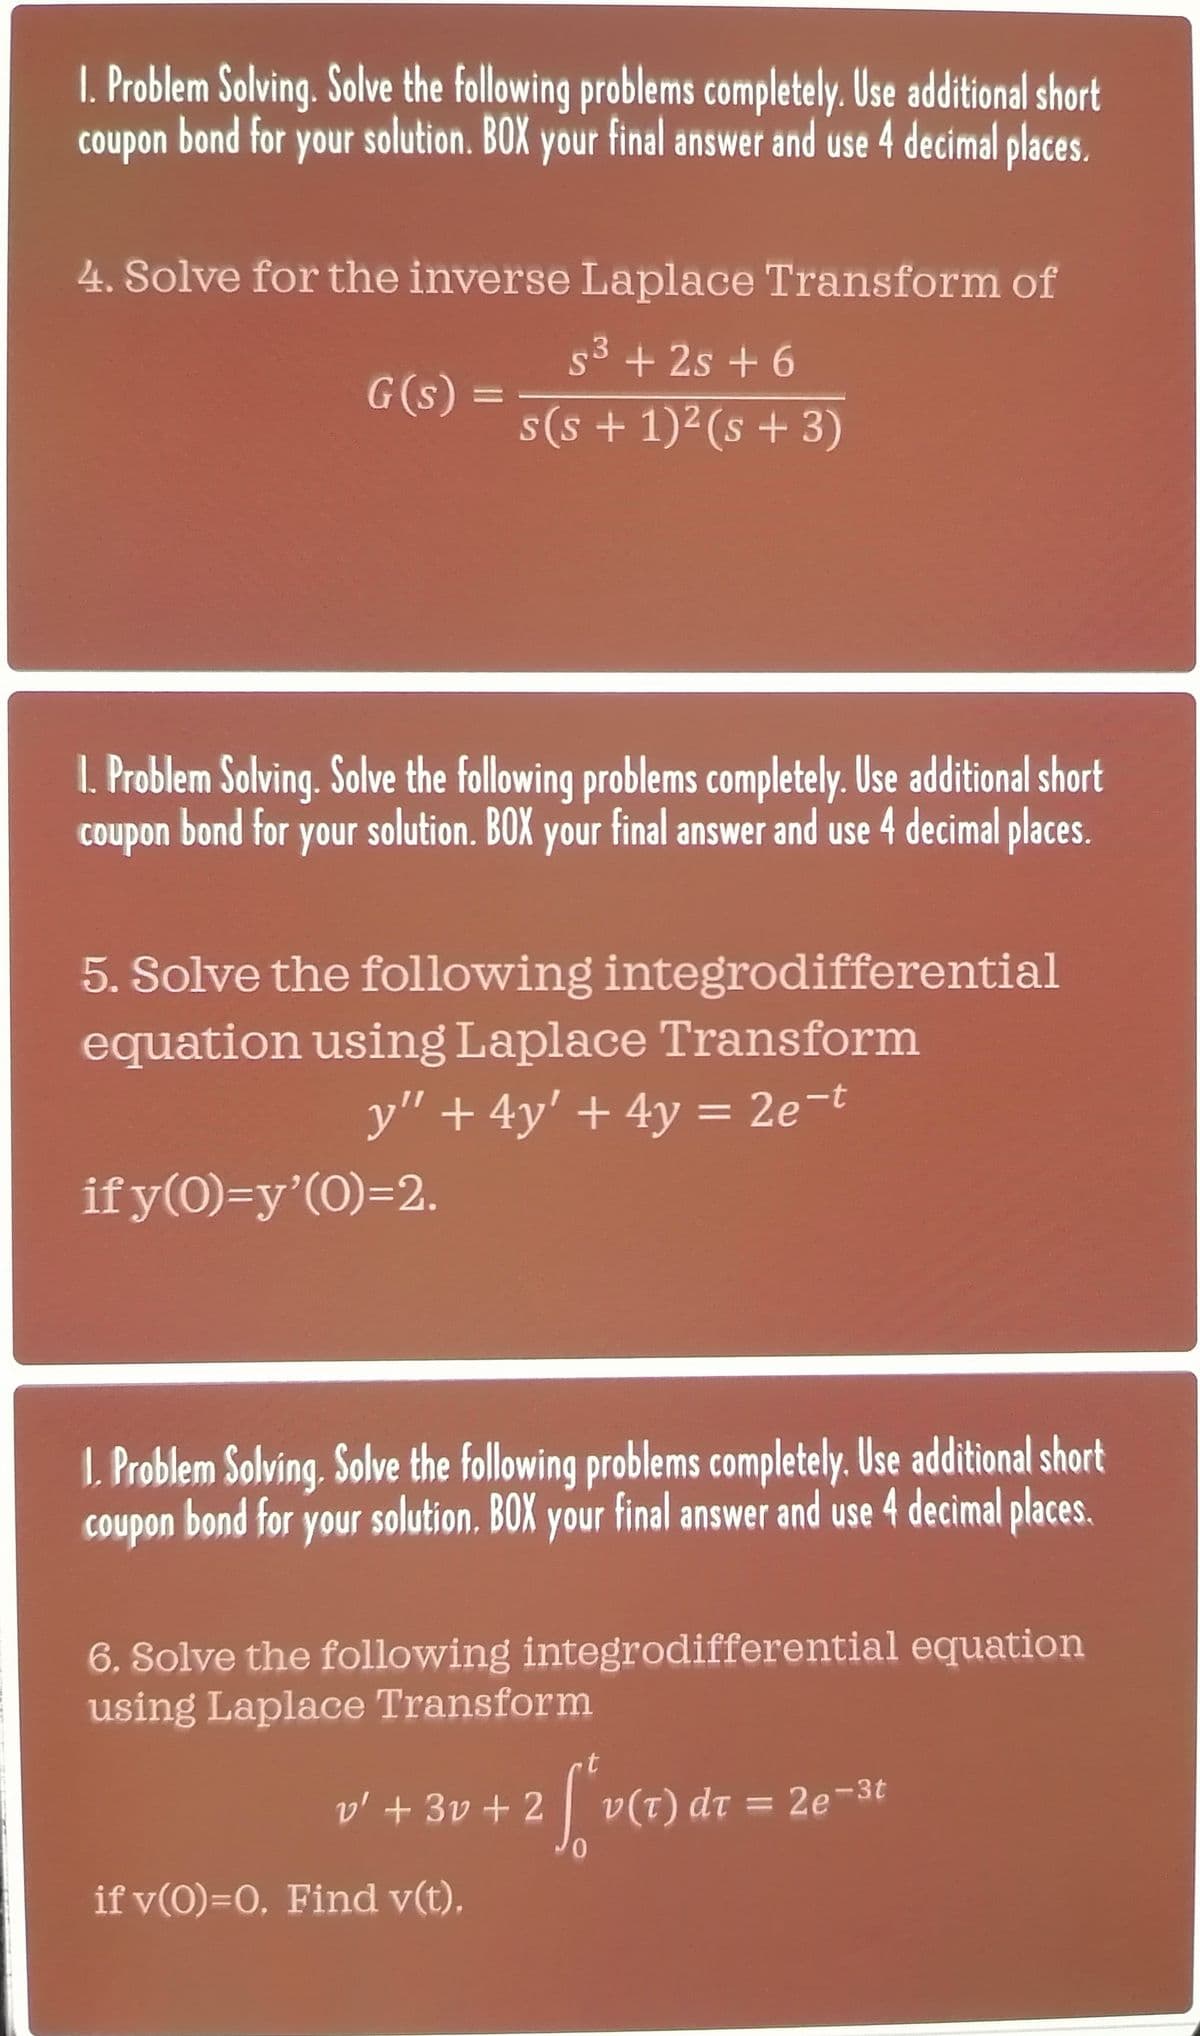 I. Problem Solving. Solve the following problems completely. Use additional short
coupon bond for your solution. BOX your final answer and use 4 decimal places.
4. Solve for the inverse Laplace Transform of
5³ +2s +6
3
s(s+ 1)² (s + 3)
G(s) =
1. Problem Solving. Solve the following problems completely. Use additional short
coupon bond for your solution. BOX your final answer and use 4 decimal places.
5. Solve the following integrodifferential
equation using Laplace Transform
y" + 4y' + 4y = 2e-t
if y(0)=y'(0)=2.
1. Problem Solving. Solve the following problems completely. Use additional short
coupon bond for your solution. BOX your final answer and use 4 decimal places.
6. Solve the following integrodifferential equation
using Laplace Transform
v' + 3v + 2
if v(0)=0. Find v(t).
t
[*v (7) dr
0
v(T) dt = 2e-3t